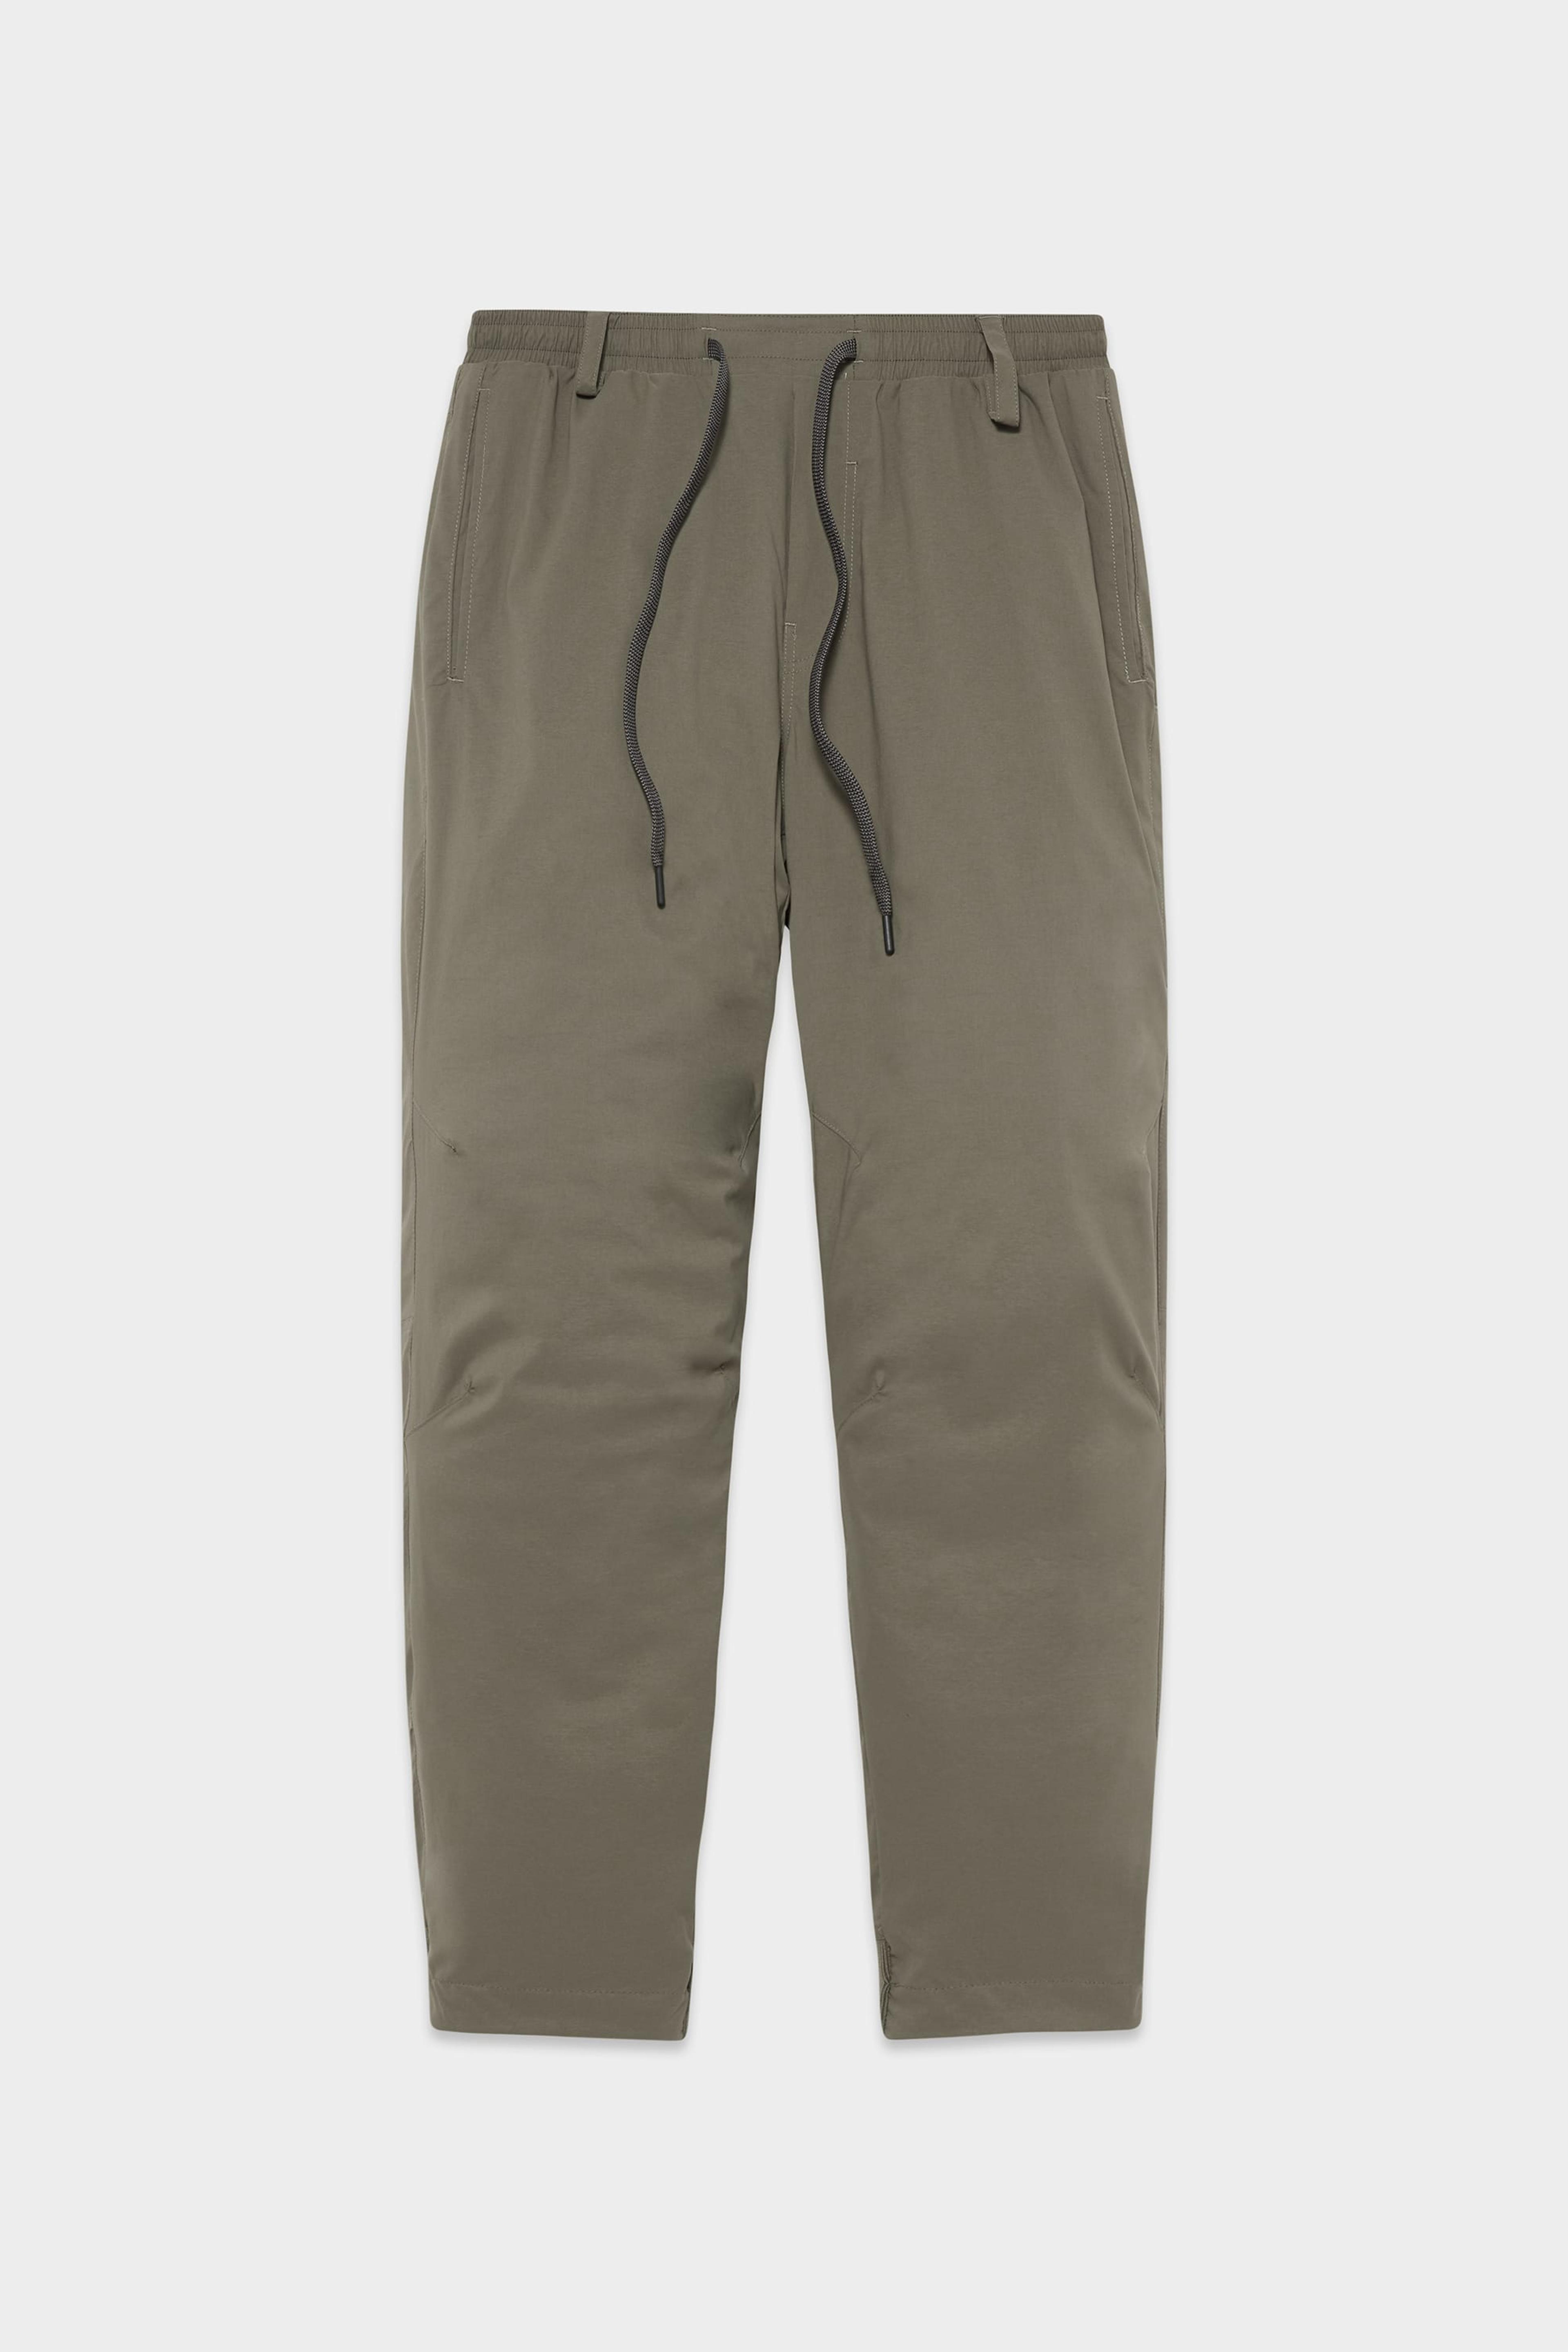 Alternate View 42 of 686 Men's Thermadry Merino-Lined Insulated Pant